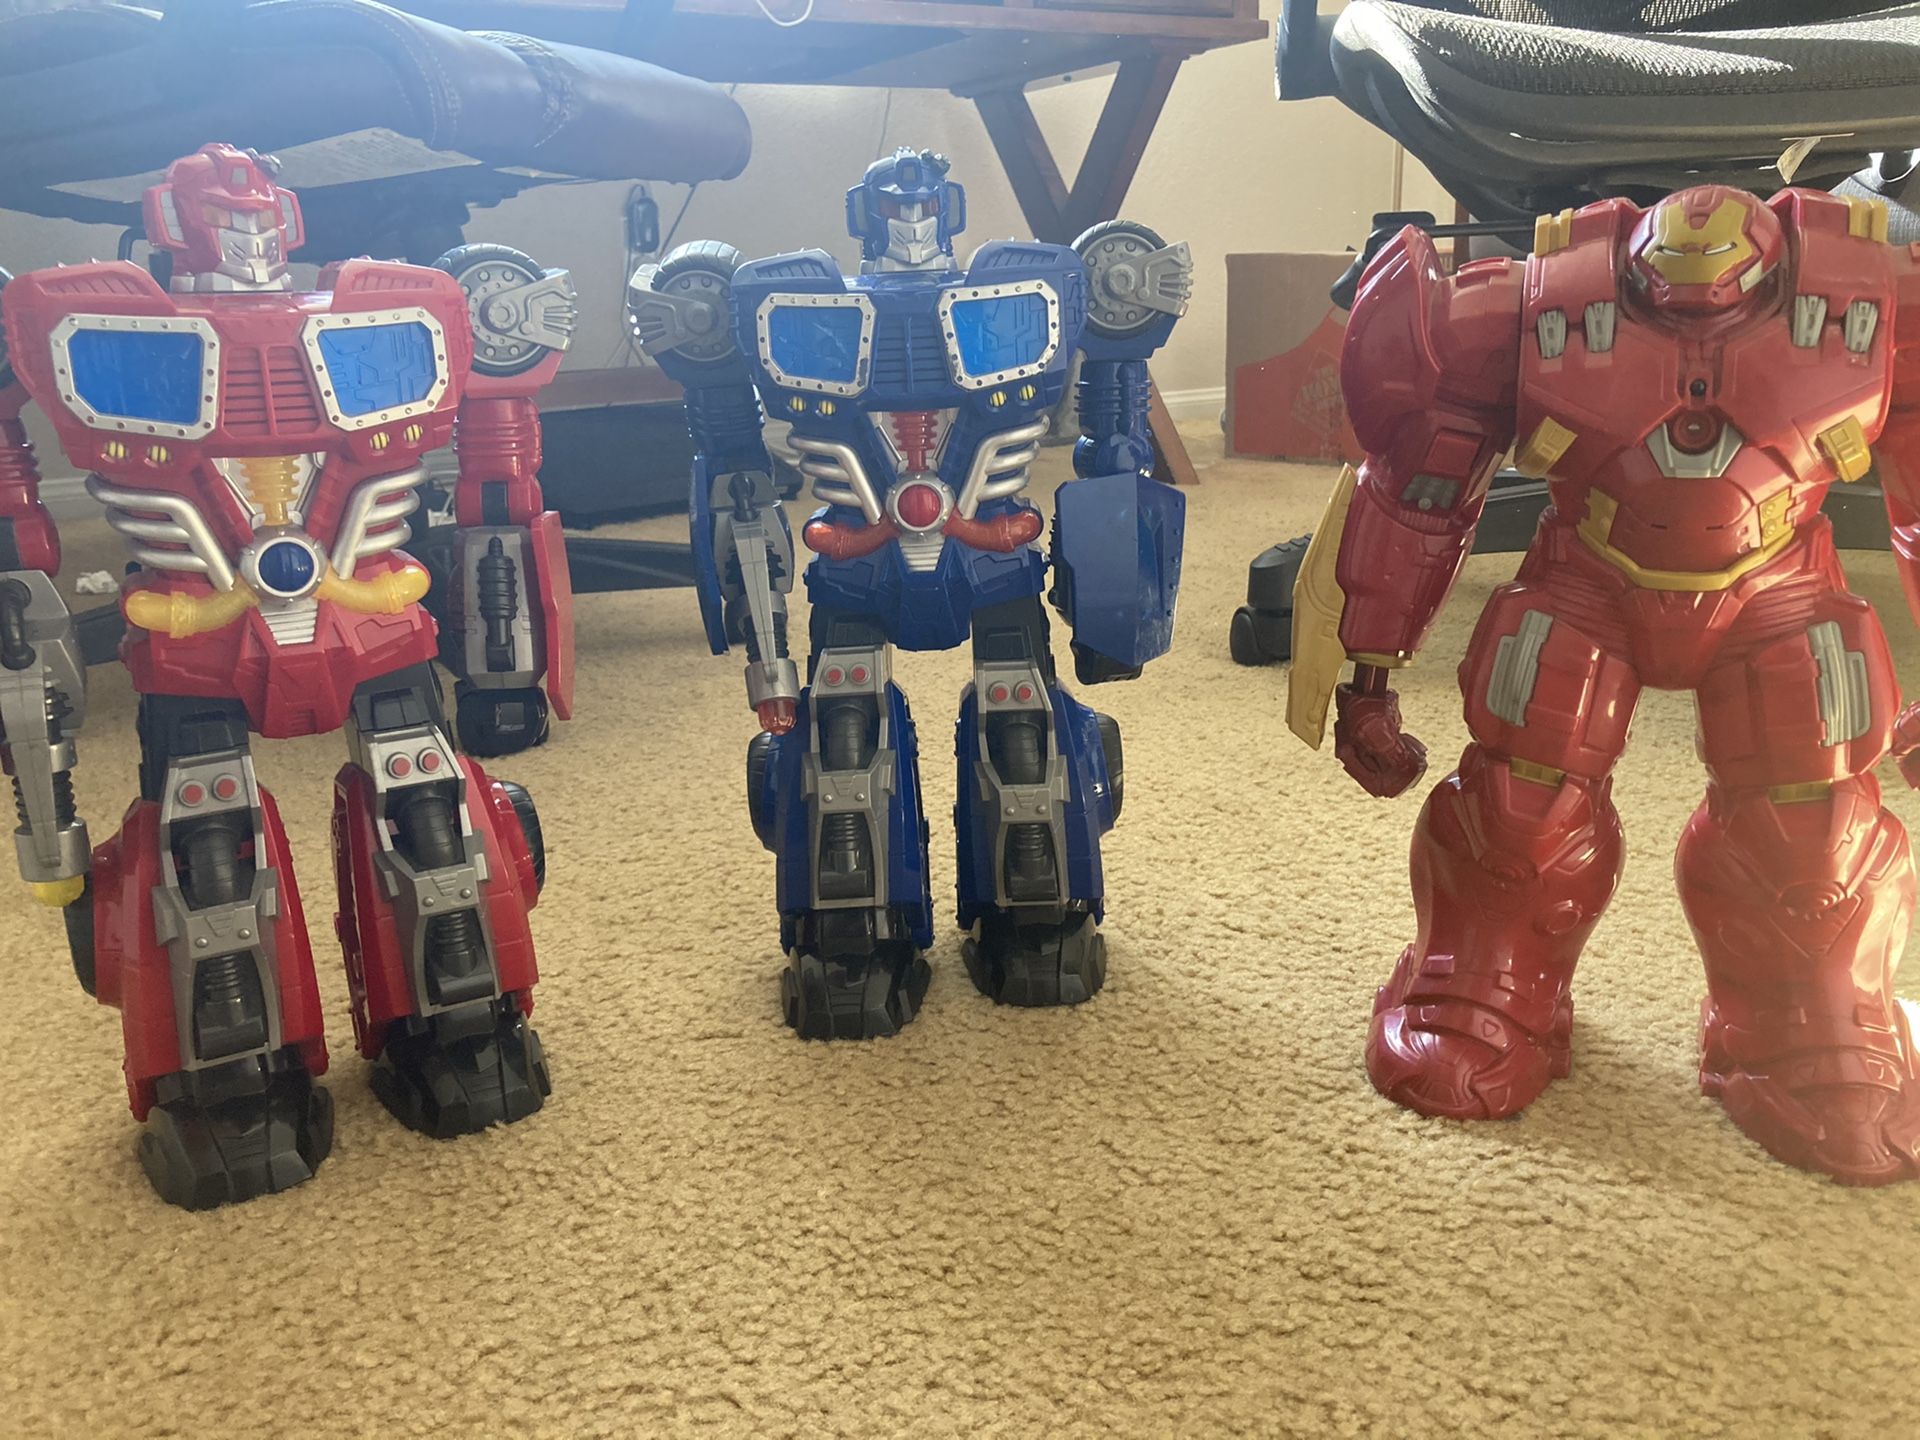 2 Large Transformers & Ironman (Battery operated) $25